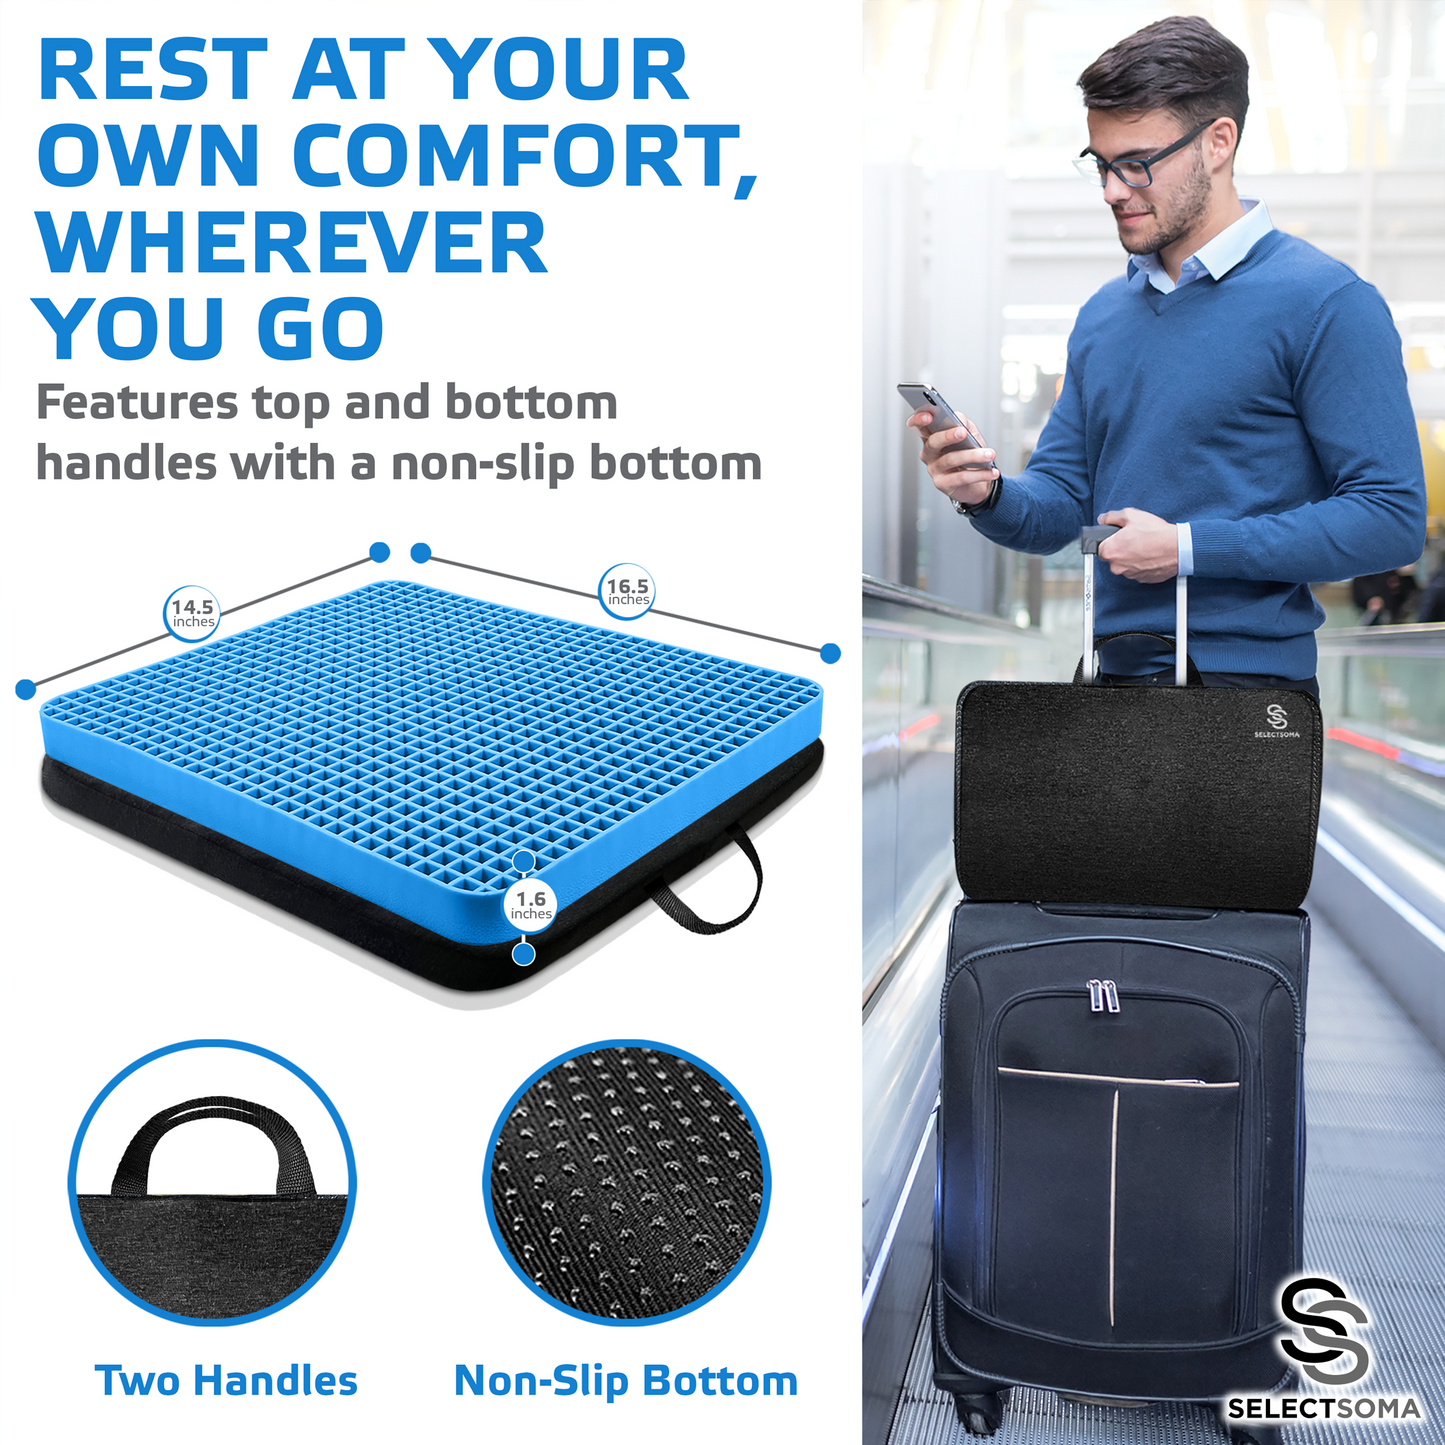 GEL SEAT CUSHION FOR LONG SITTING-RELIEF FOR BACK PRESSURE-COOLING GEL PAD  FOR CAR, OFFICE ,CHAIR, TRAVEL, WHEELCHAIR.HELPS WITH SCIATICA, COCCYX